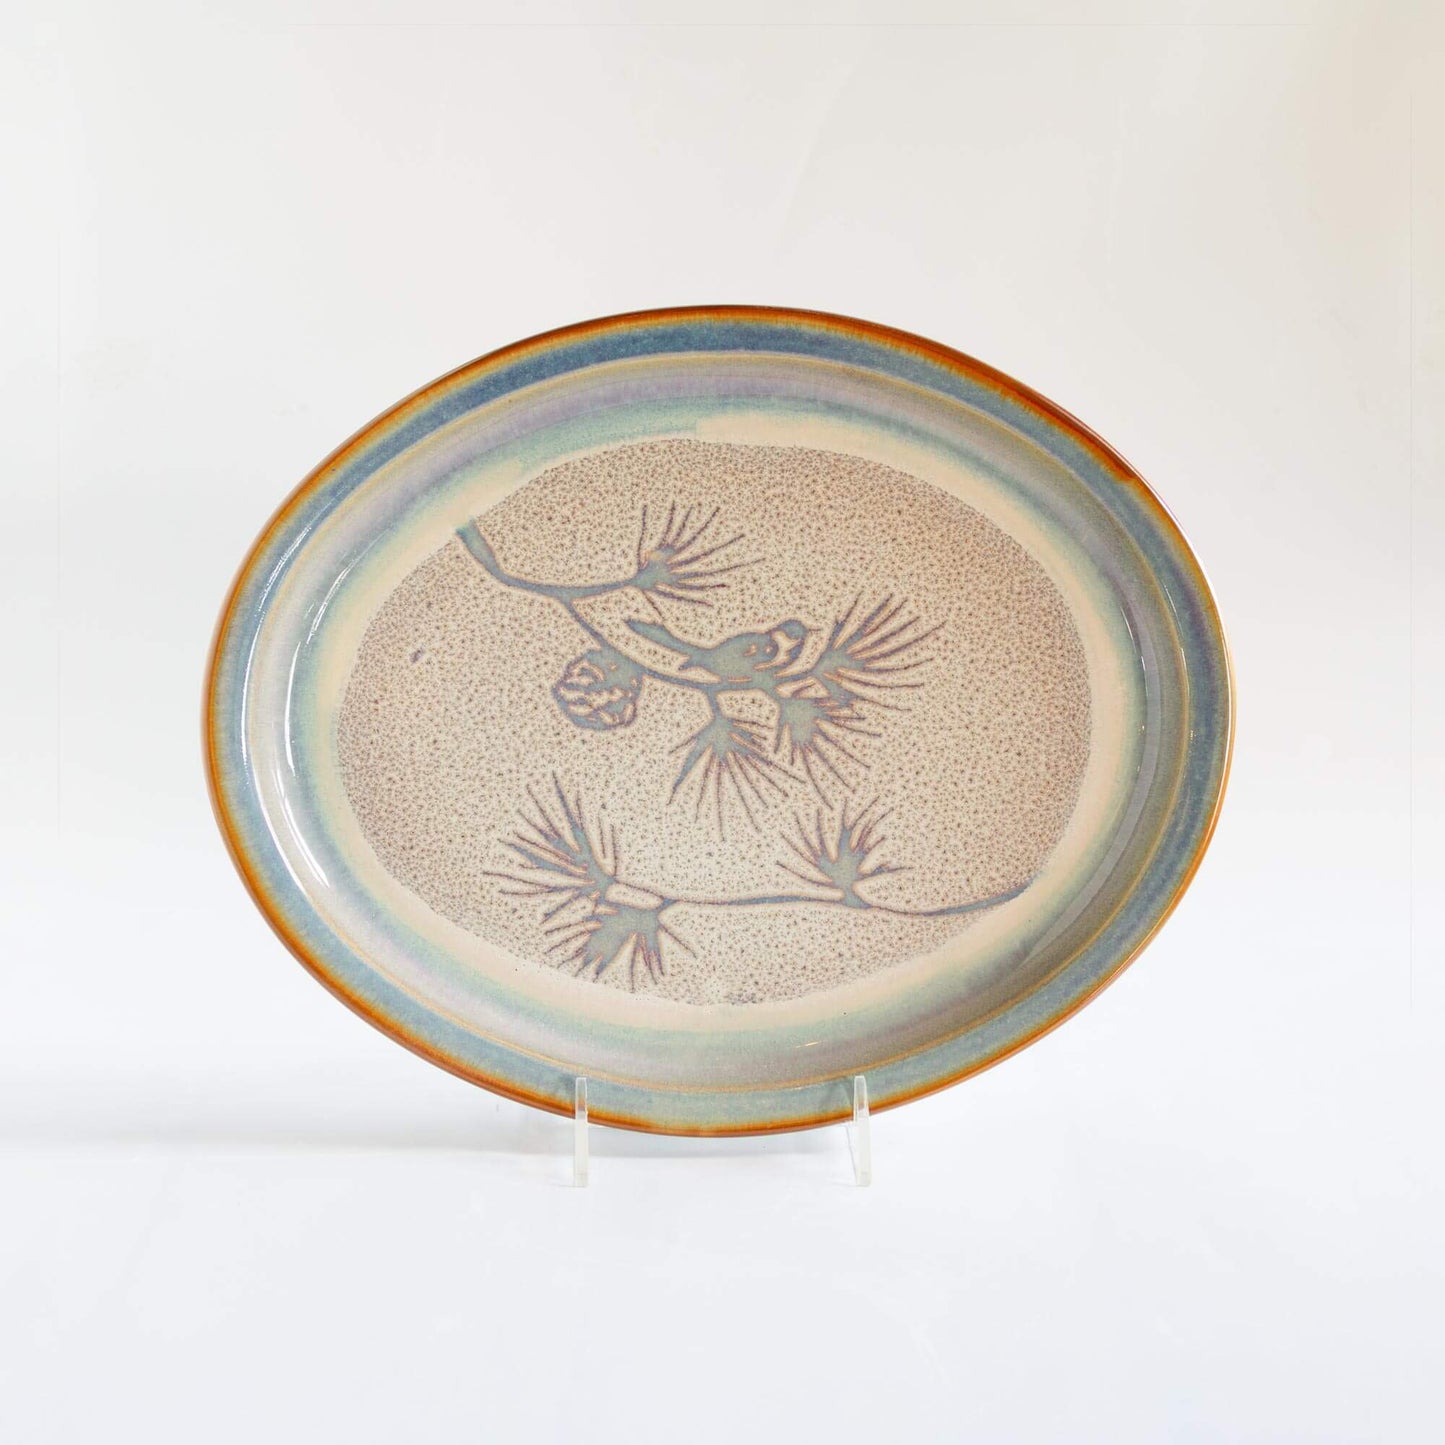 Handmade Pottery Oval Platter in Purple Chickadee pattern made by Georgetown Pottery in Maine